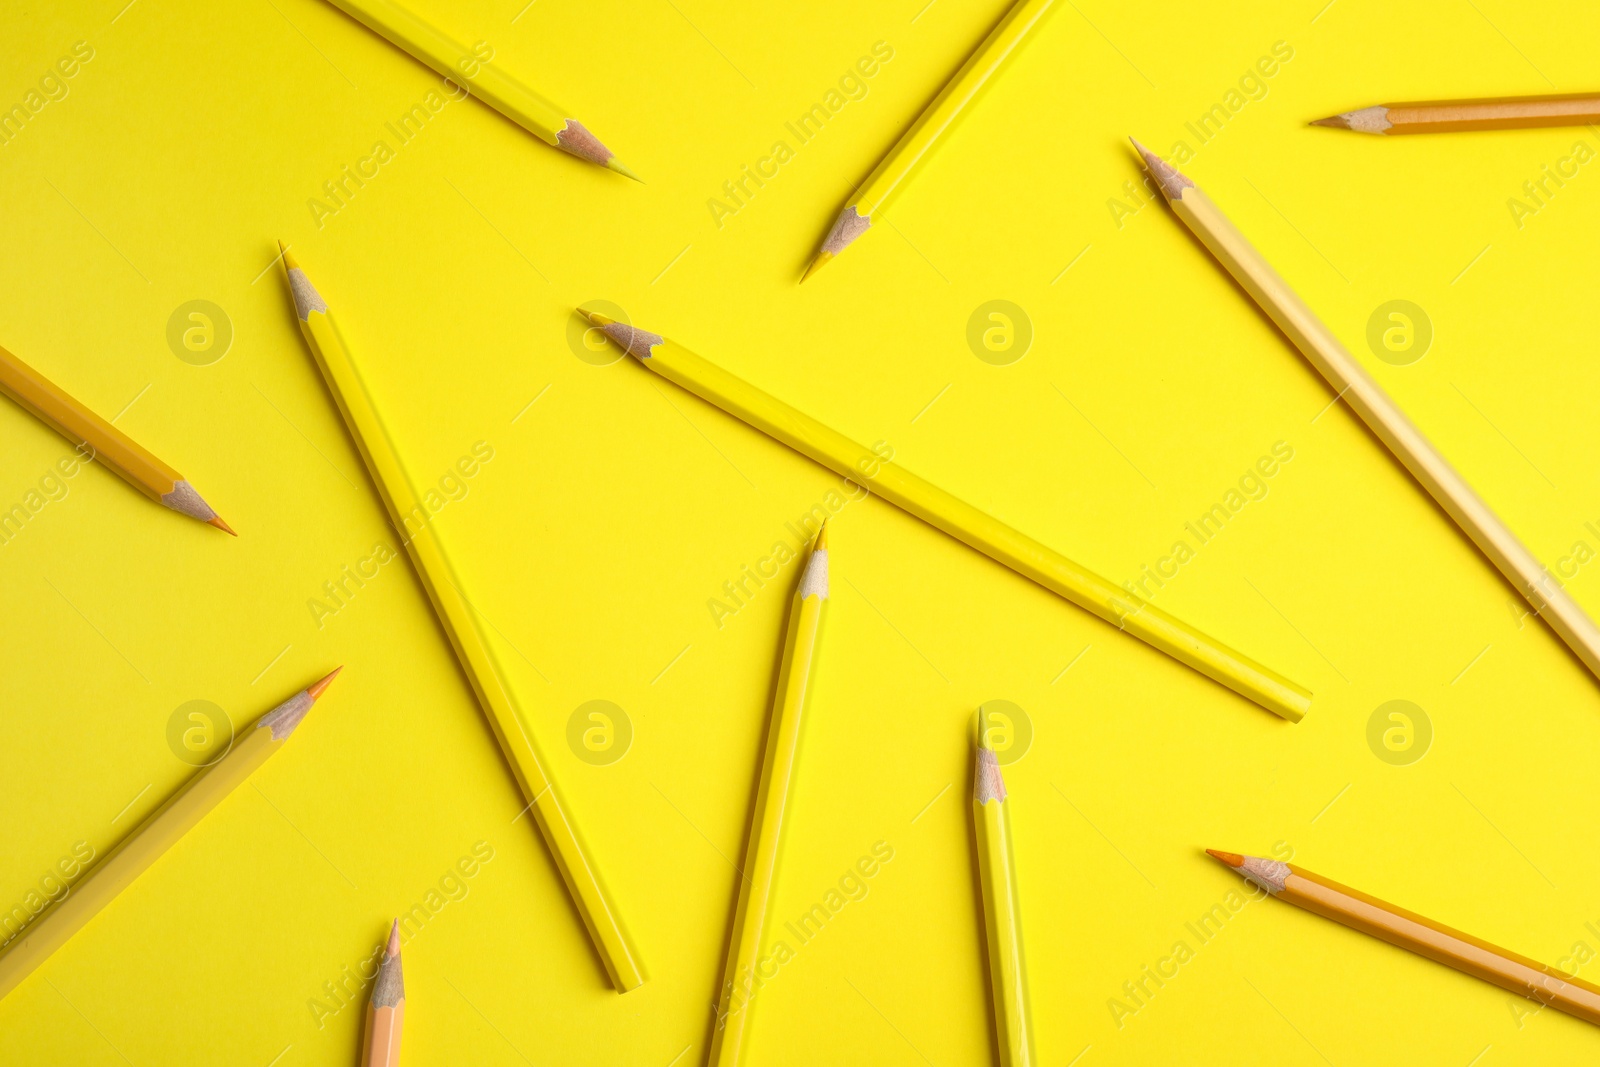 Photo of Flat lay composition with color pencils on yellow background